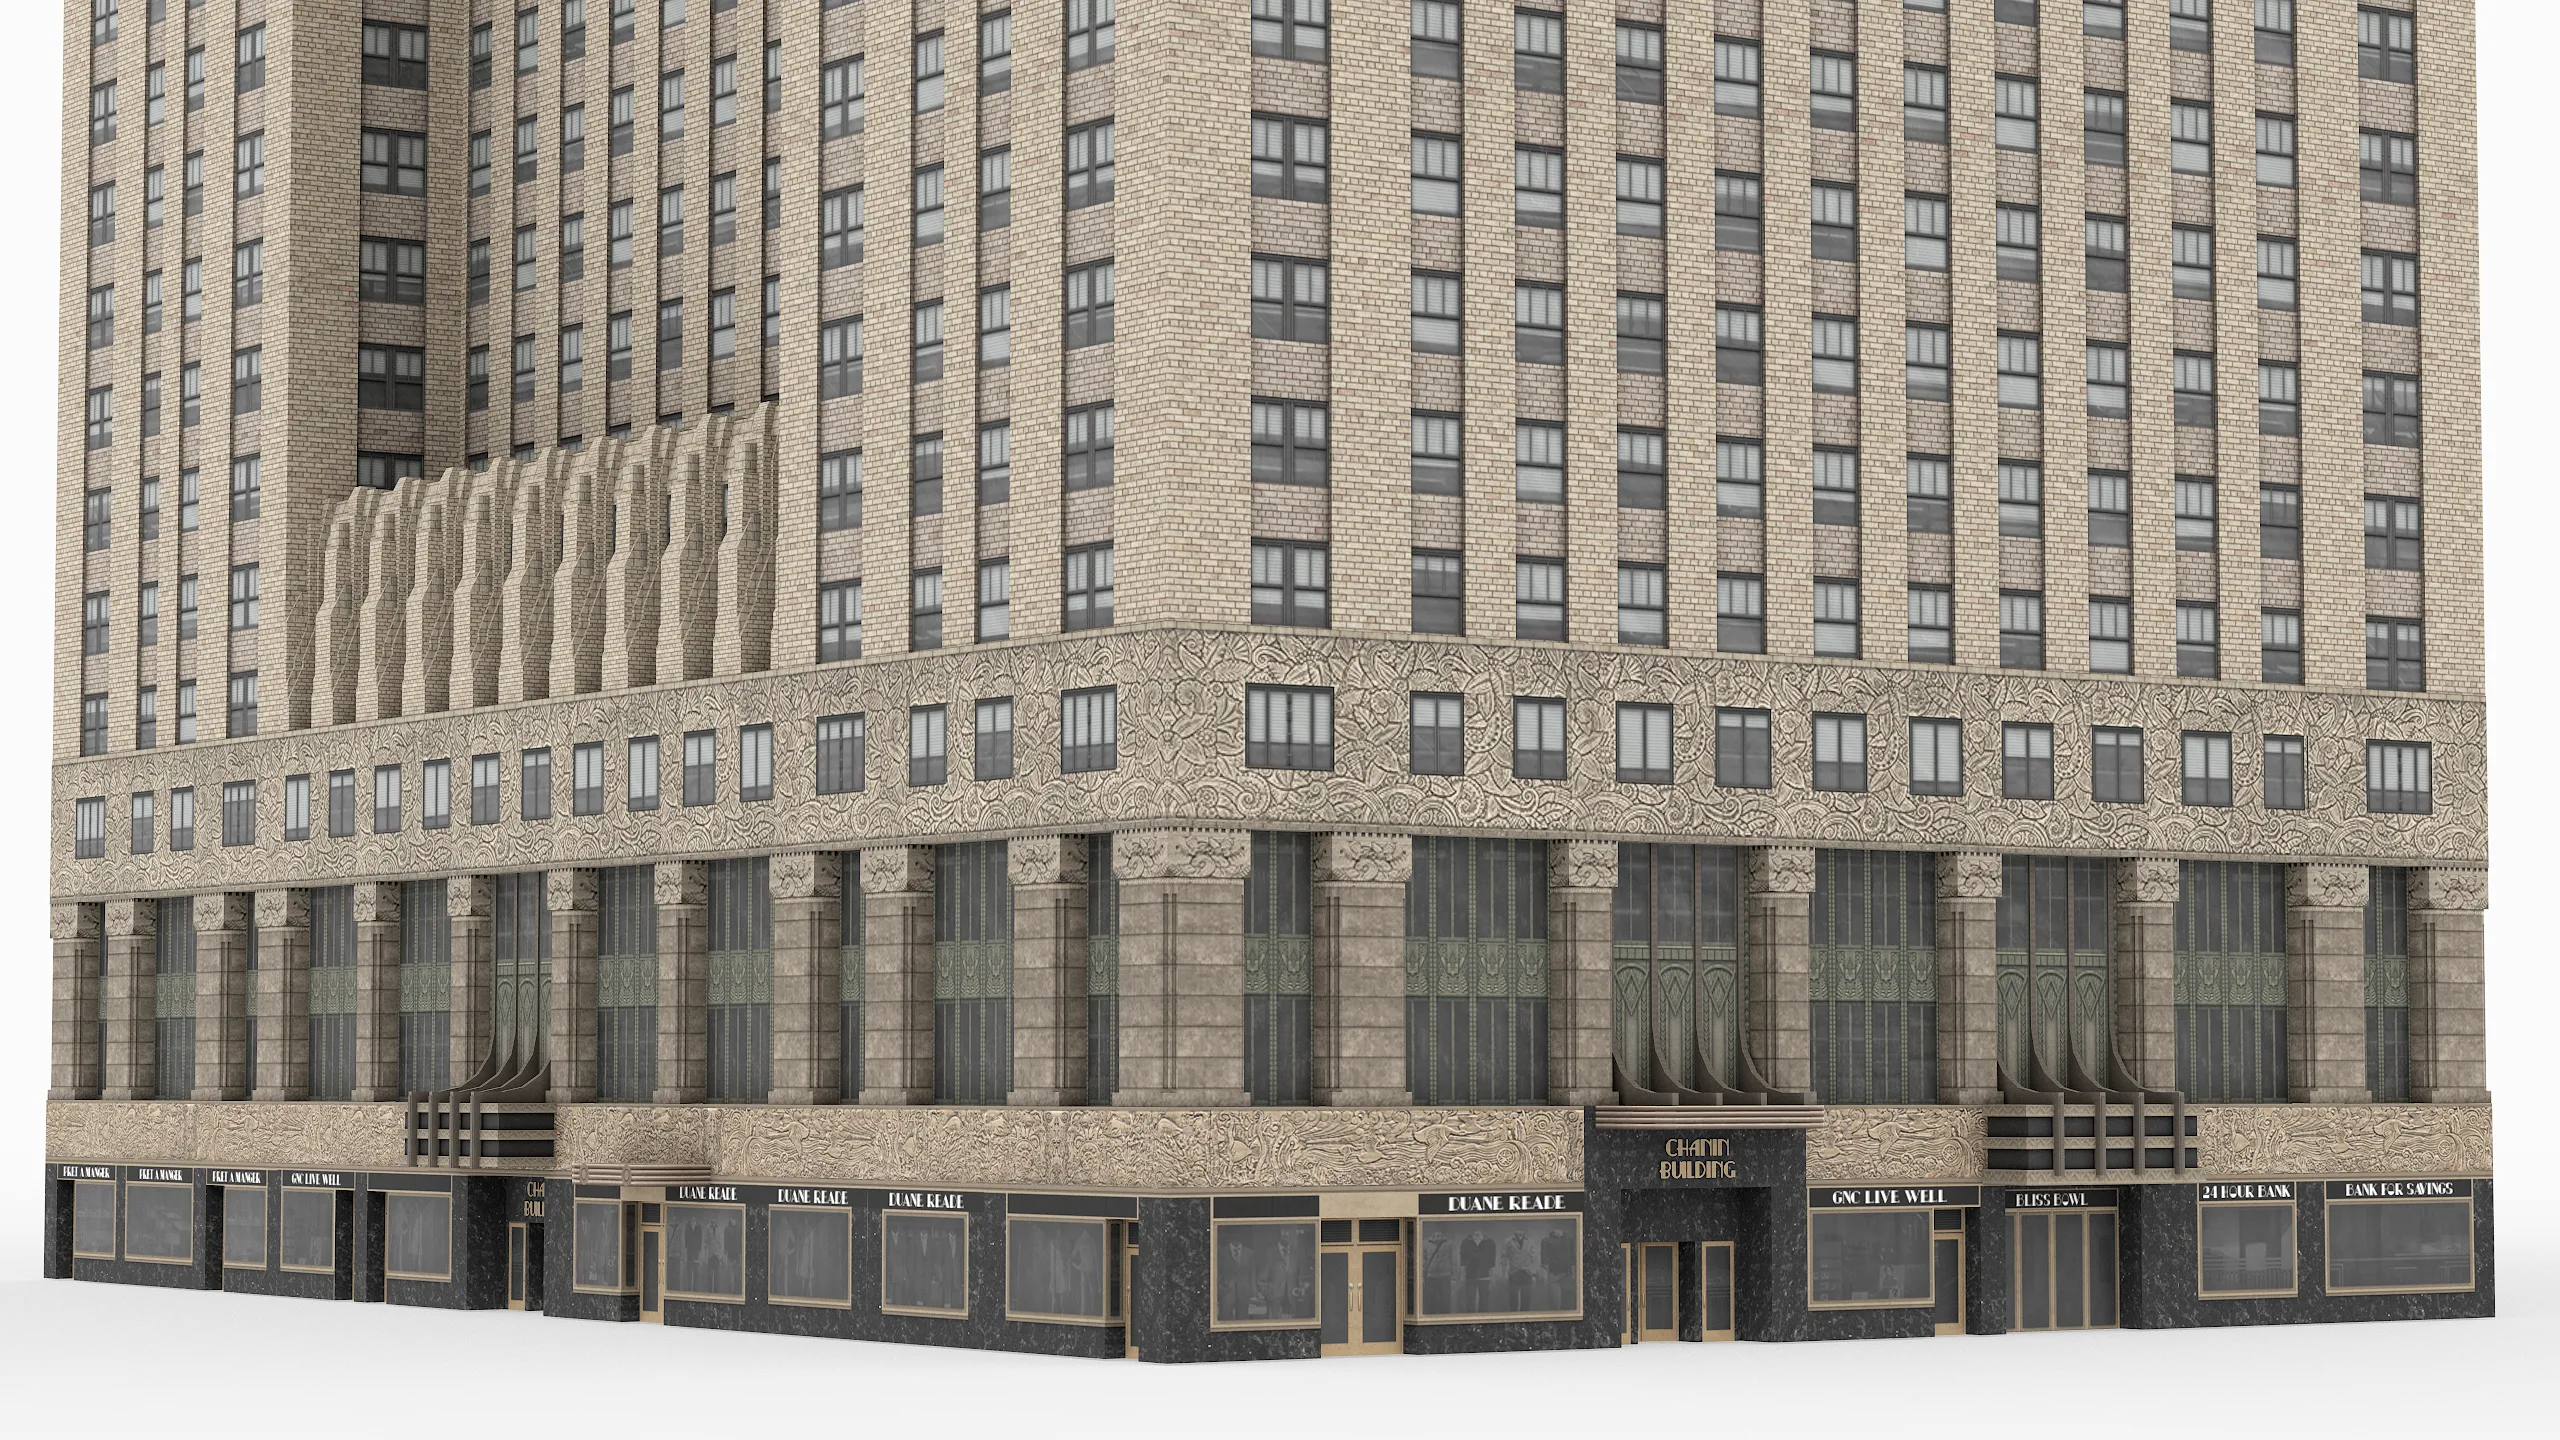 Render image of Chanin Building